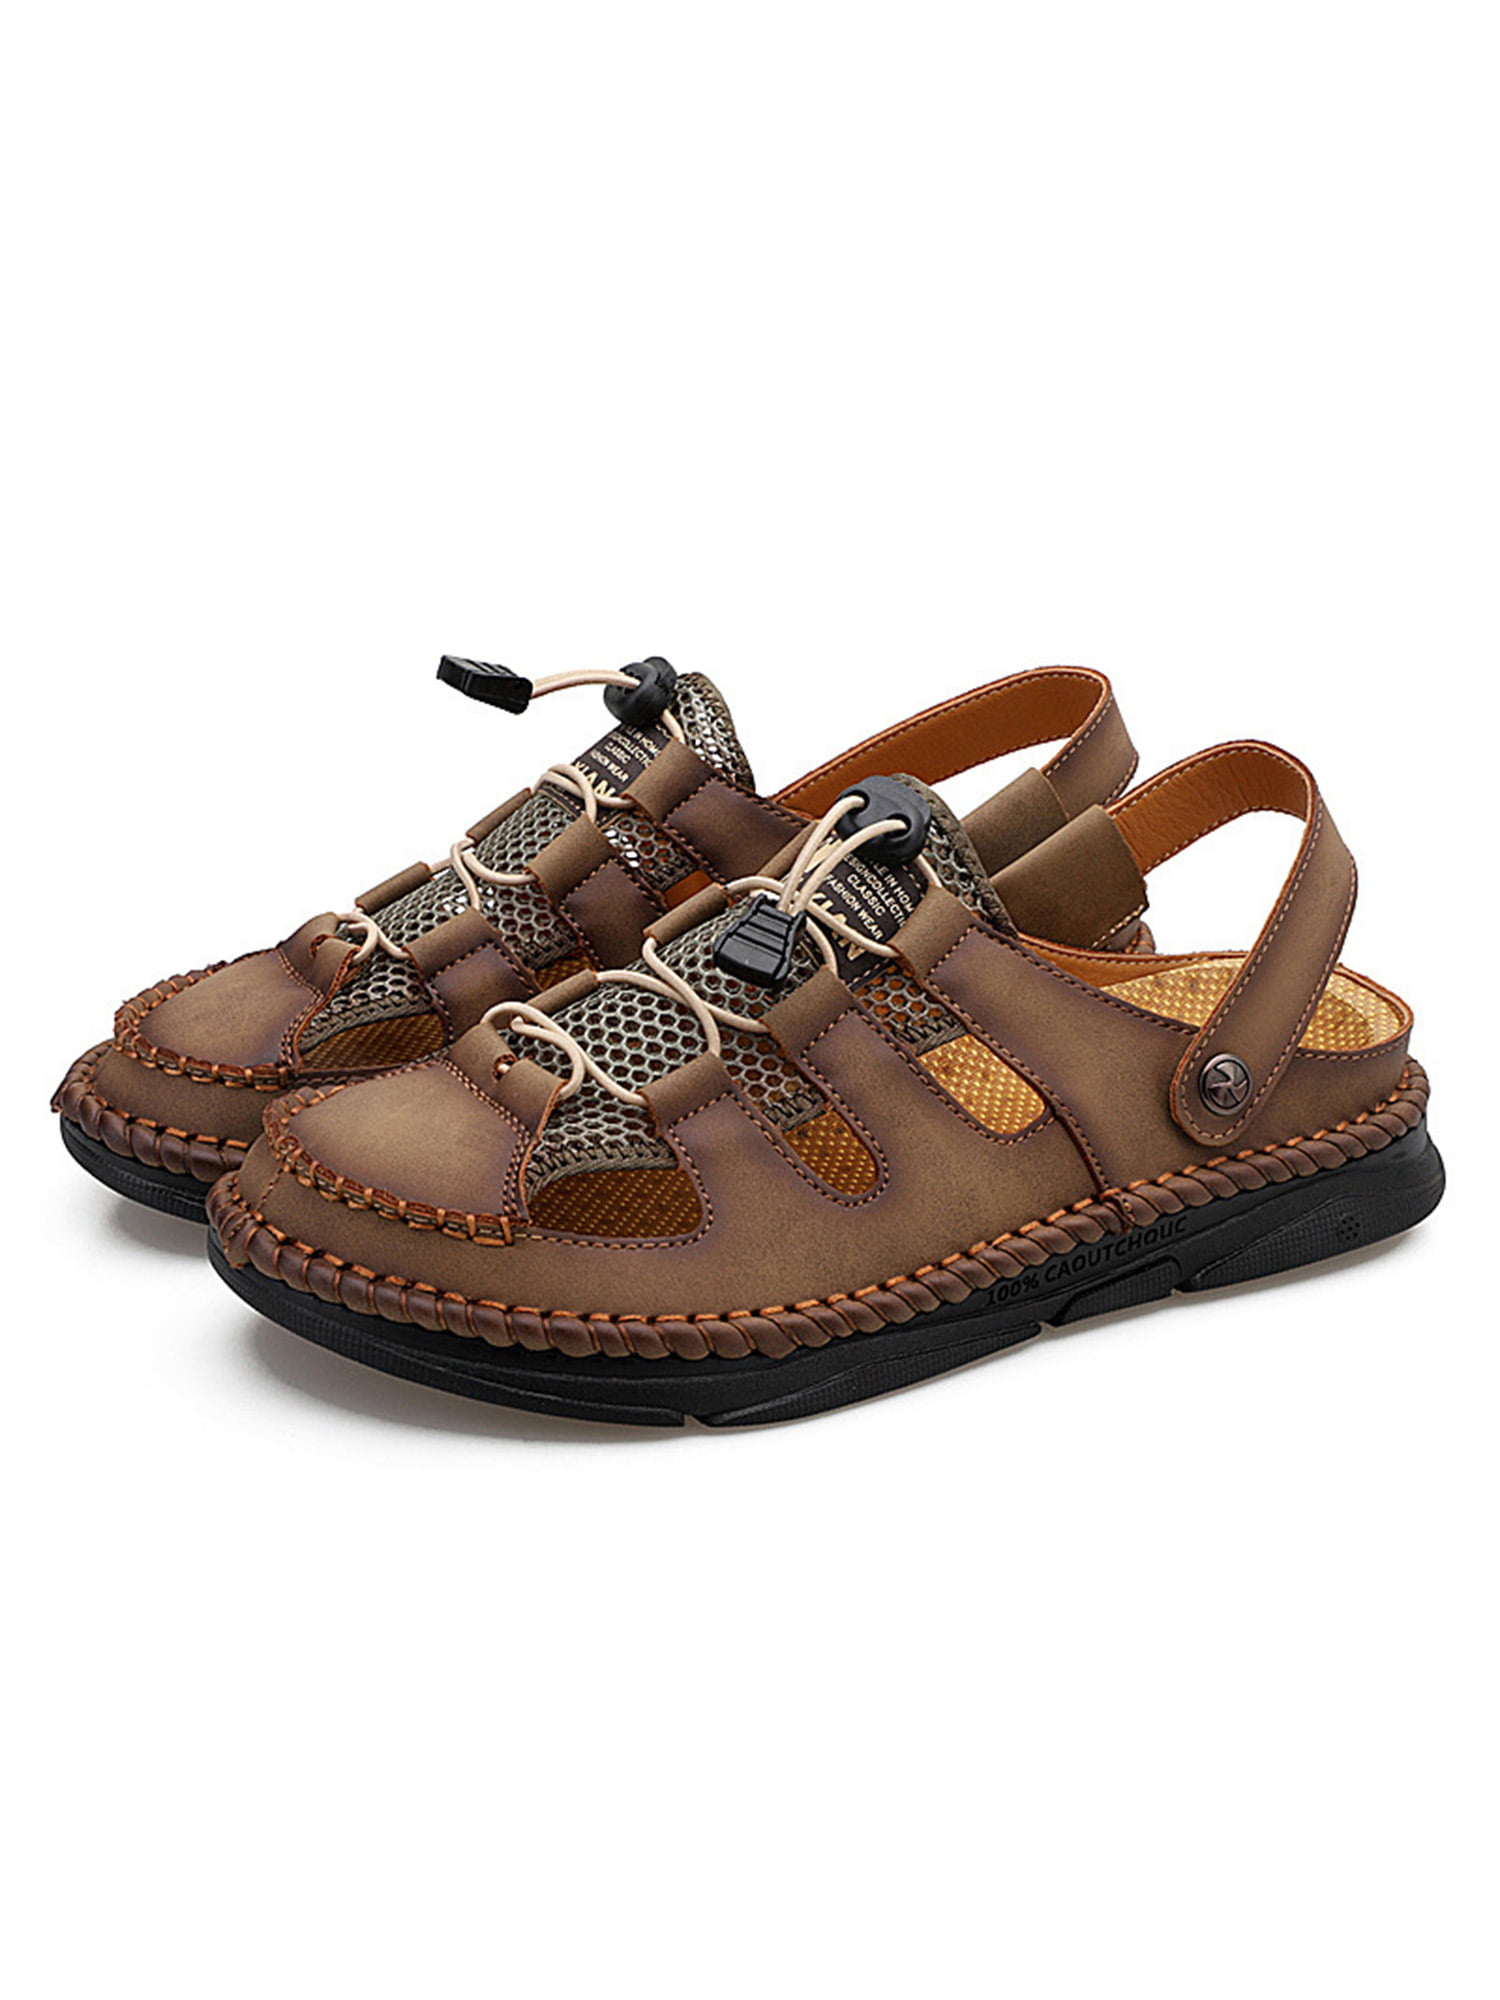 New Men Beach Buckle Strap Hollowed Out asual Breathable Fisherman Sandal Shoes